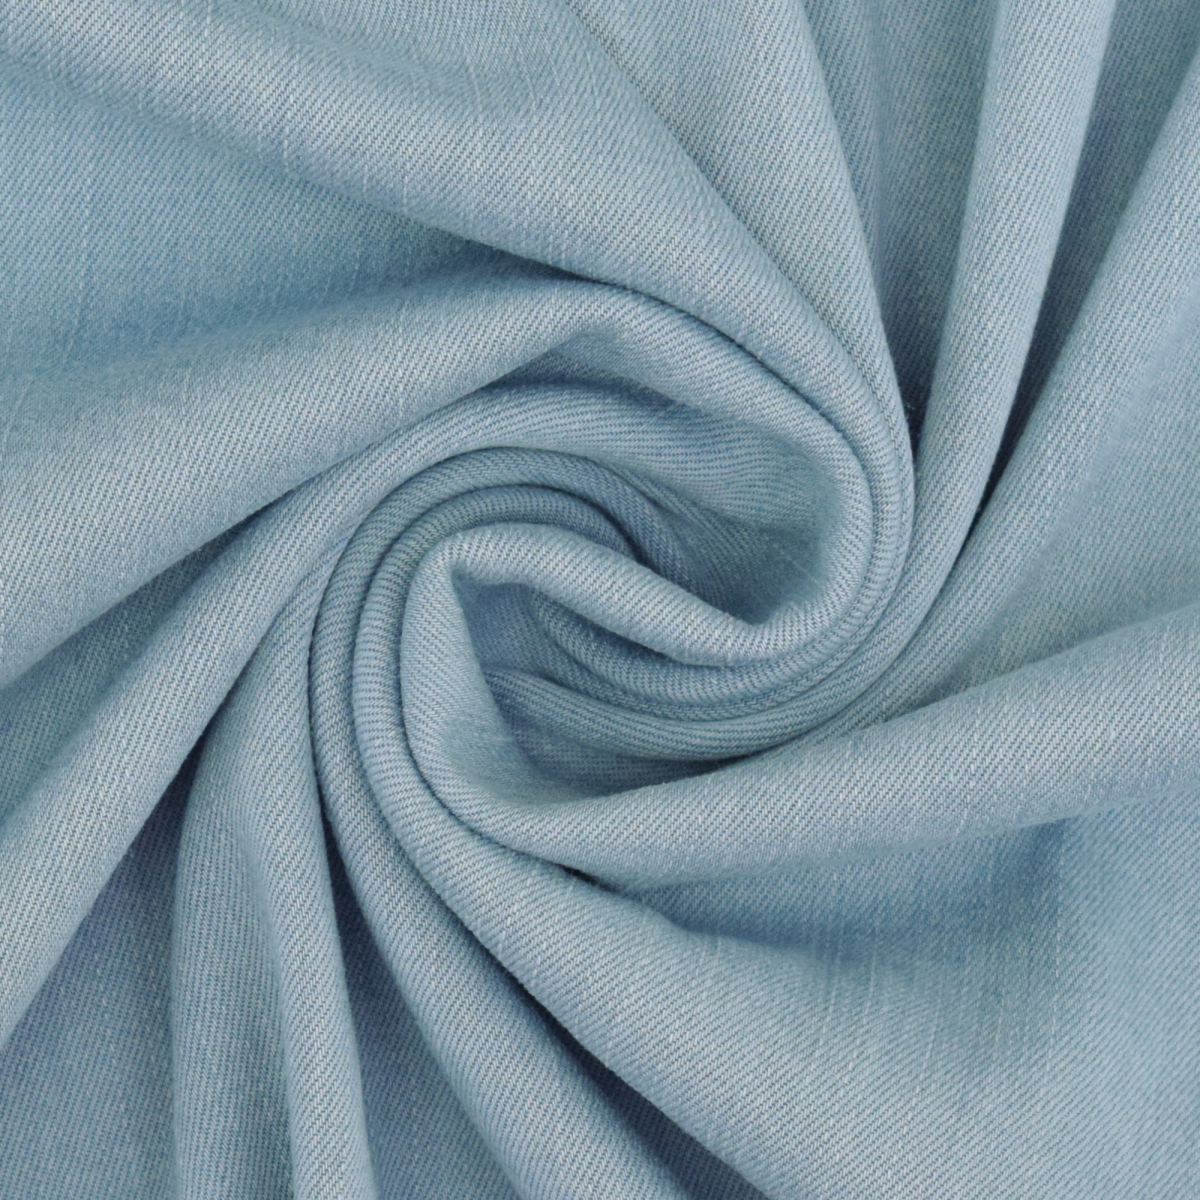 Denim Fabric Manufacturers & Suppliers in India | Sudarshan Terry Mills